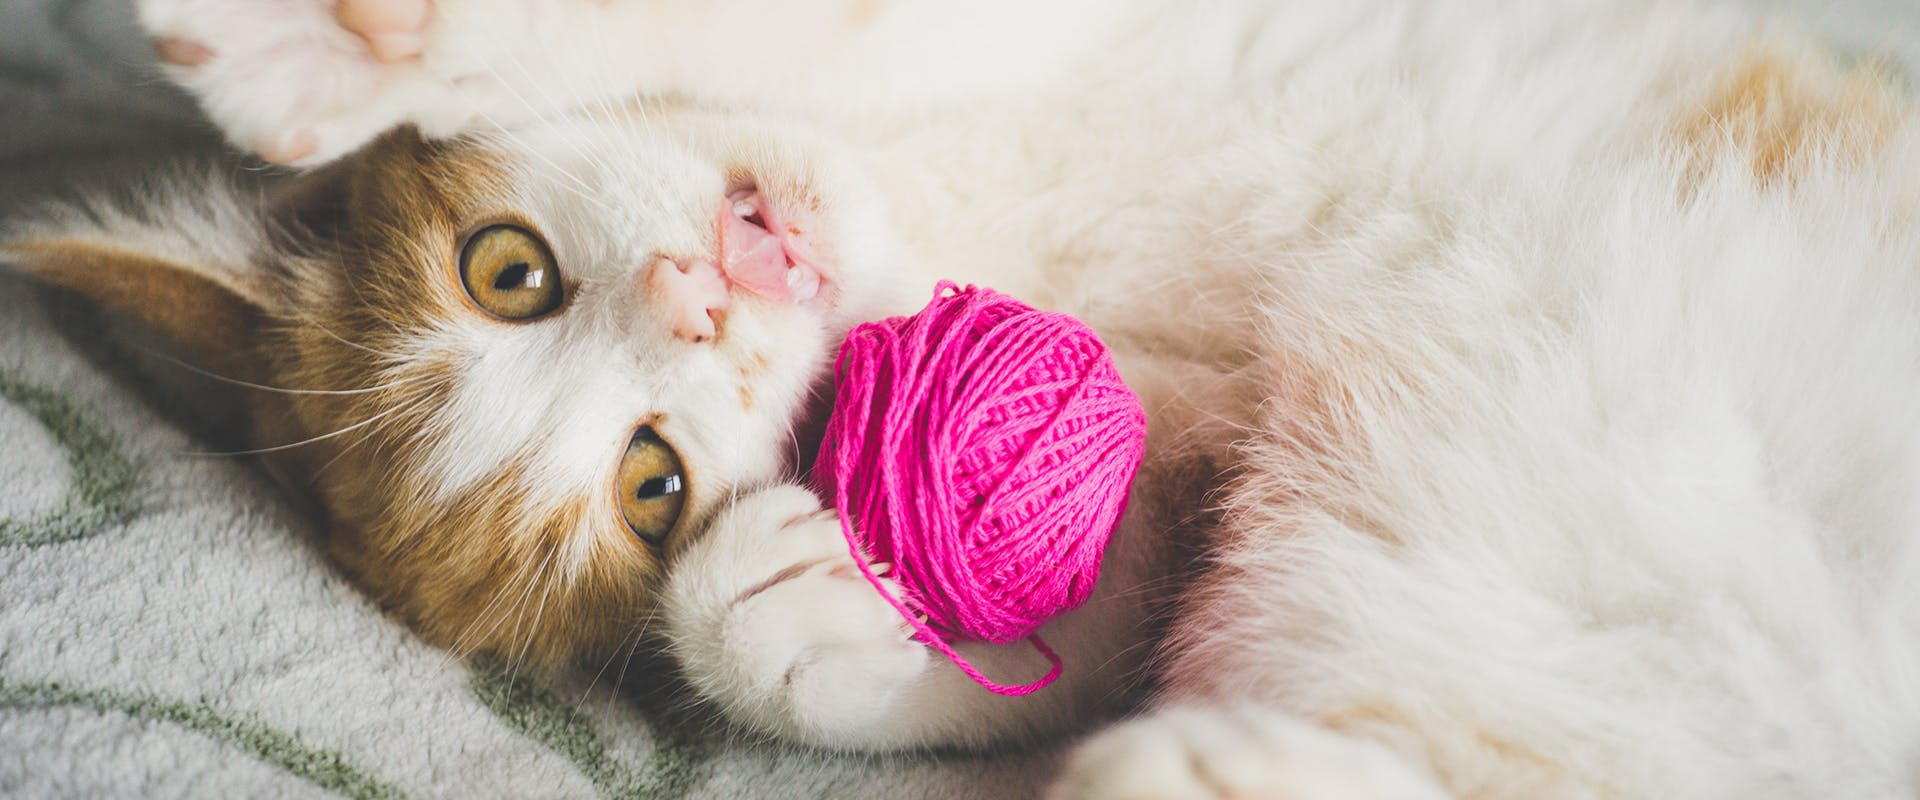 A cute kitten playing with a brightly pink cat ball toy